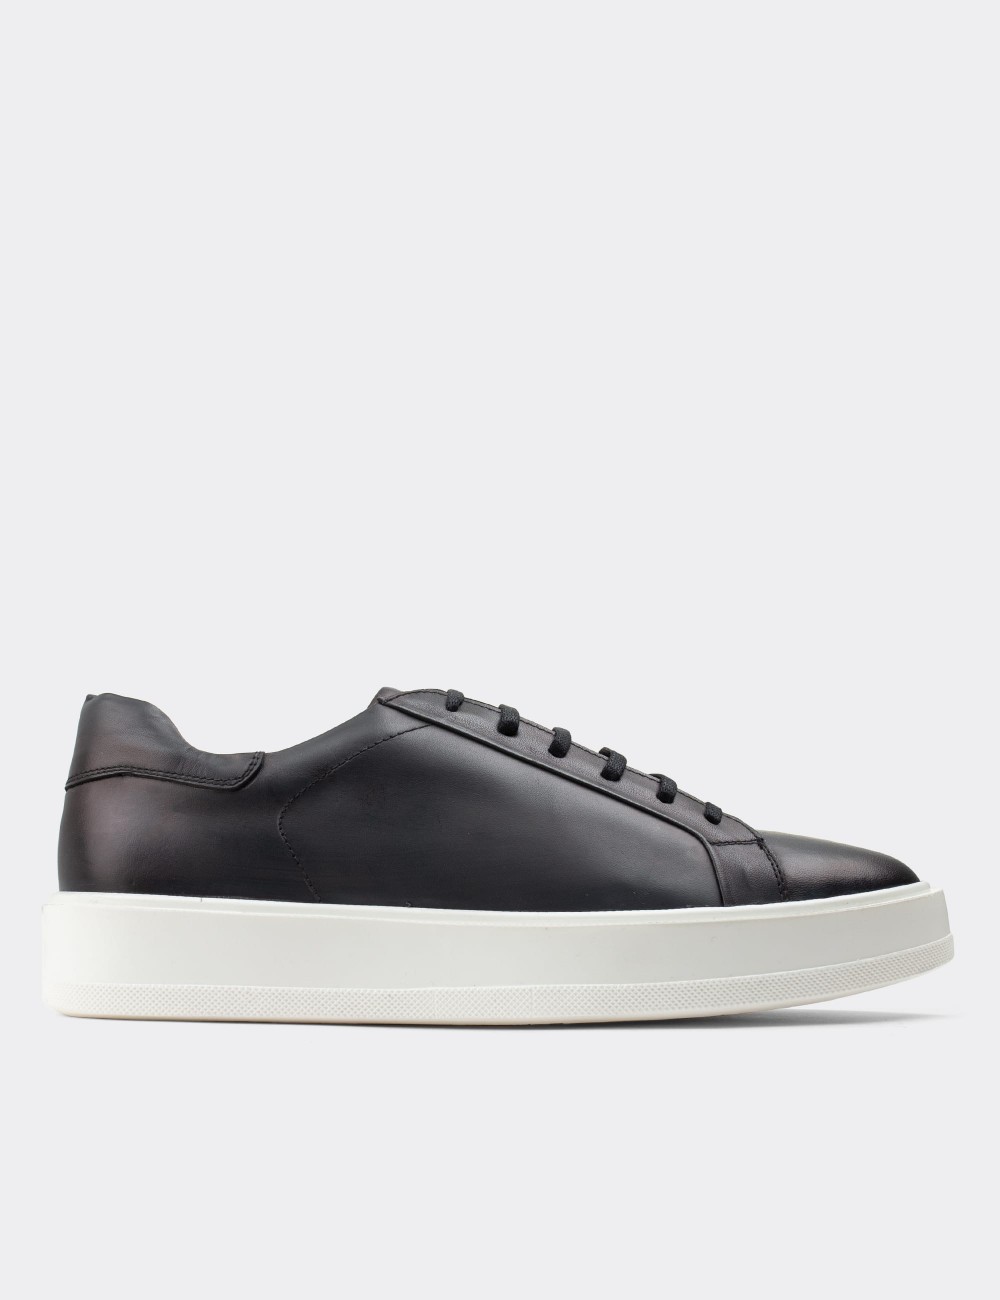 Gray  Leather Sneakers - 01829MGRIP02